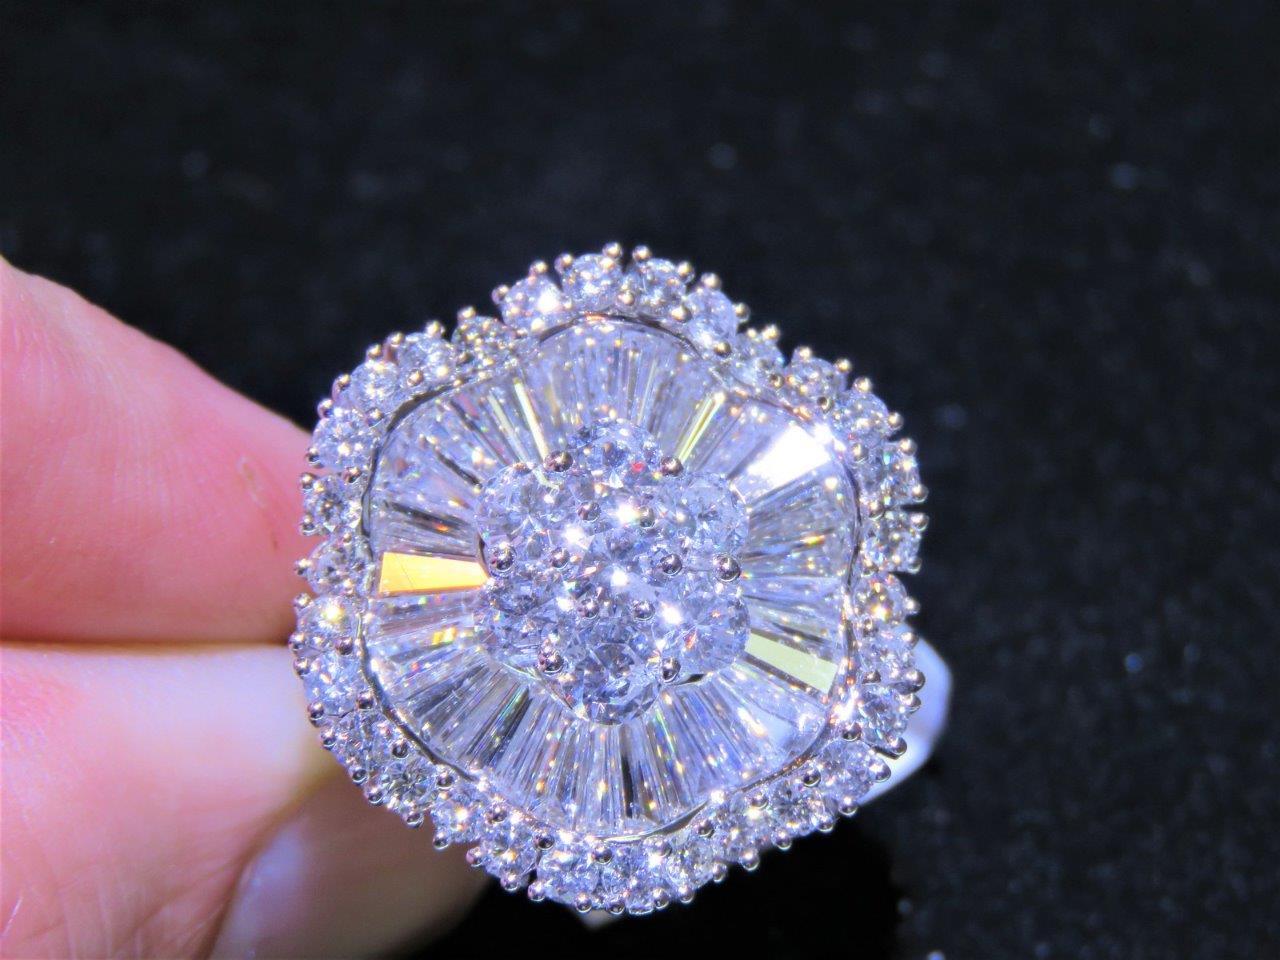 The Following Items we are offering is a Rare Important 18KT White Gold Large Diamond Floral Shaped Ring. Ring is comprised of Finely Set Glittering Diamonds forming a Flower. T.C.W. Approx 4CTS!! The Diamonds are of Exquisite and Fine Quality. This